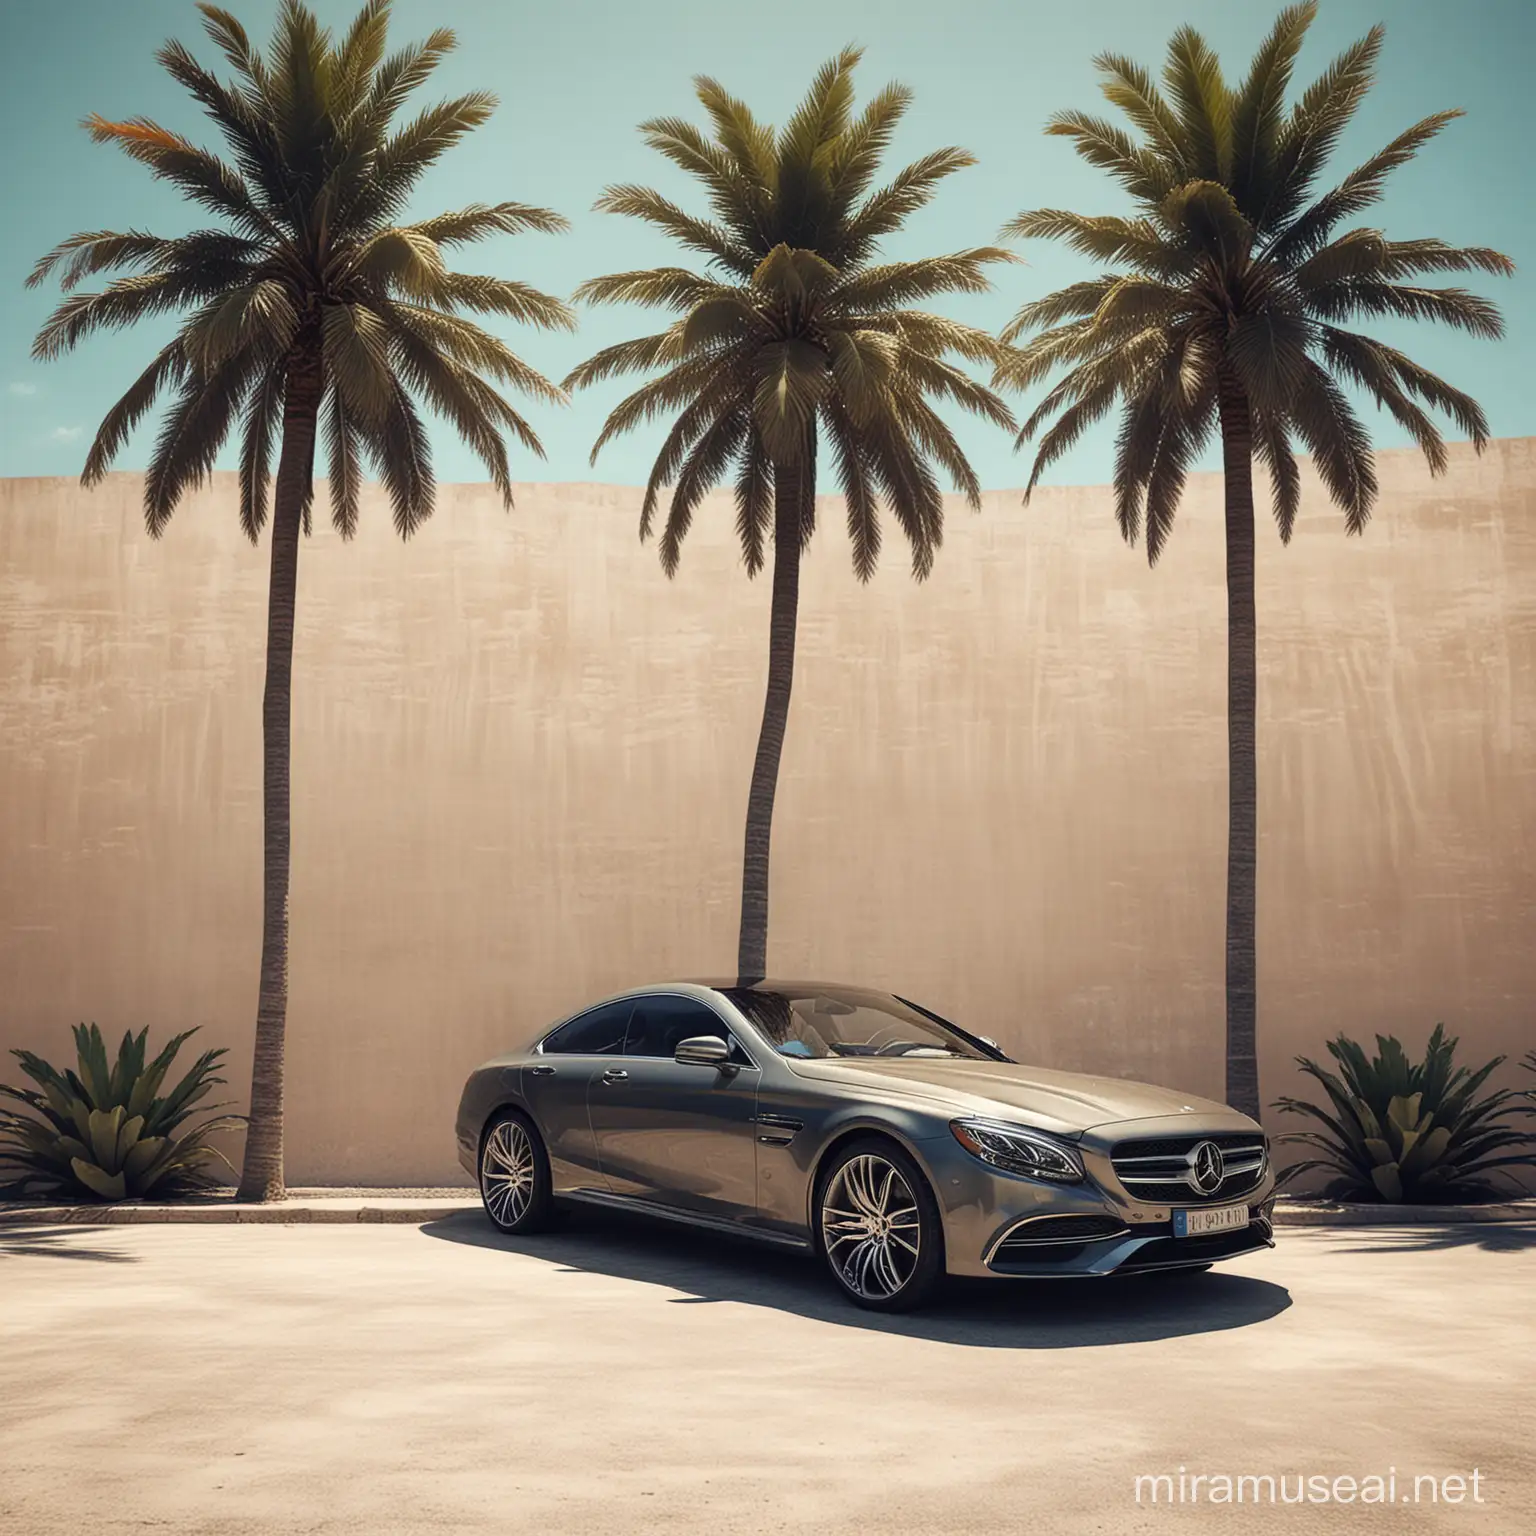 create simple summer textures with palm trees and a luxury car in between